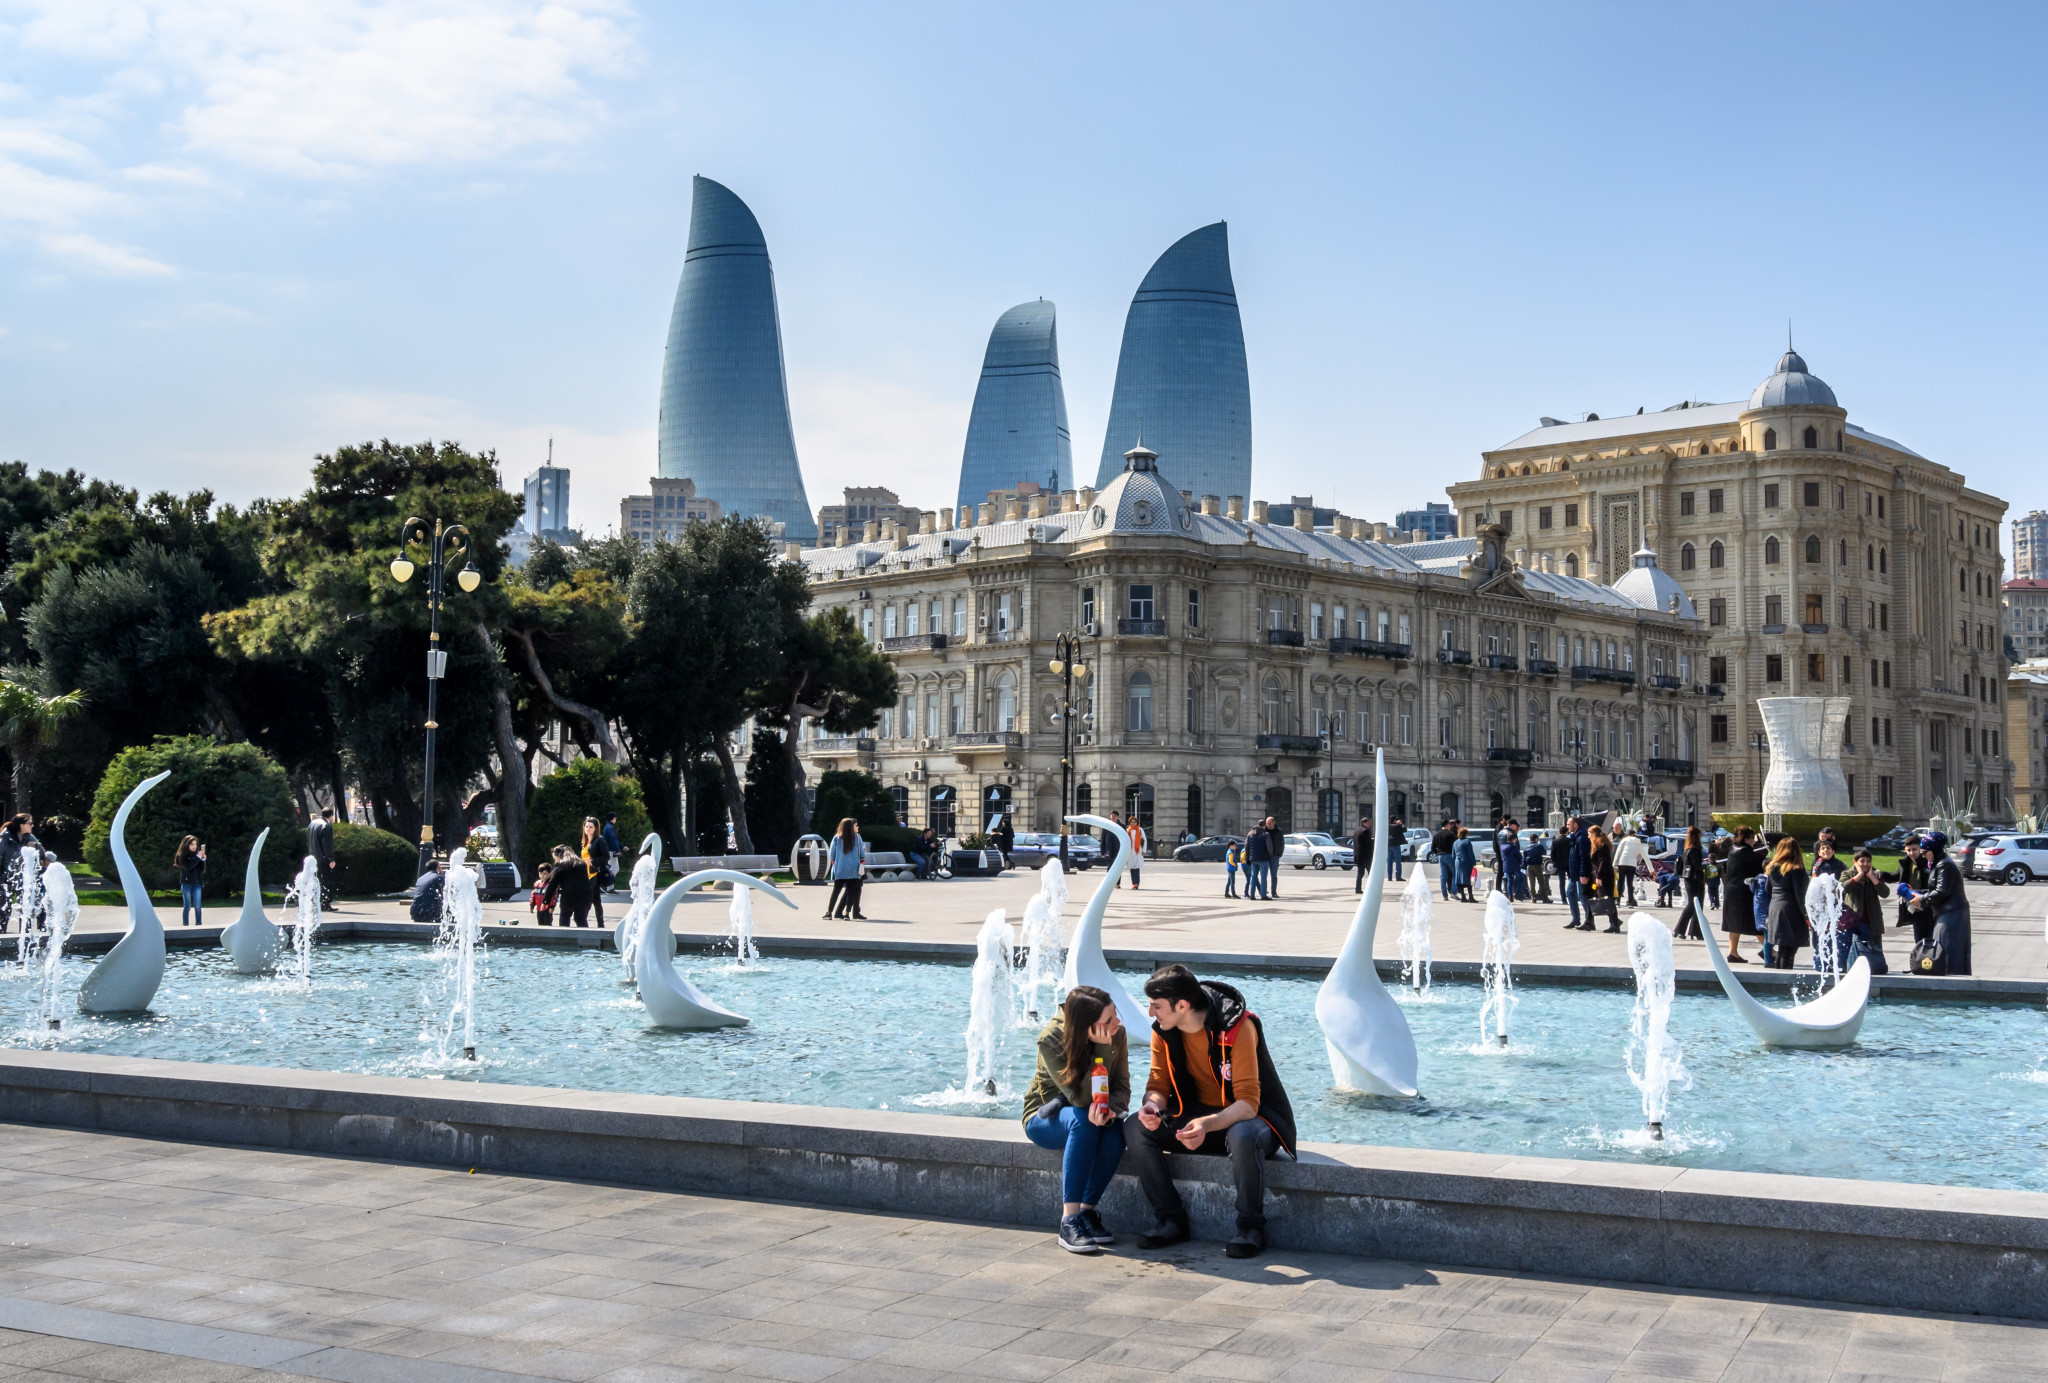 Baku is set to host matches in Group A, far away from any other city ©Getty Images